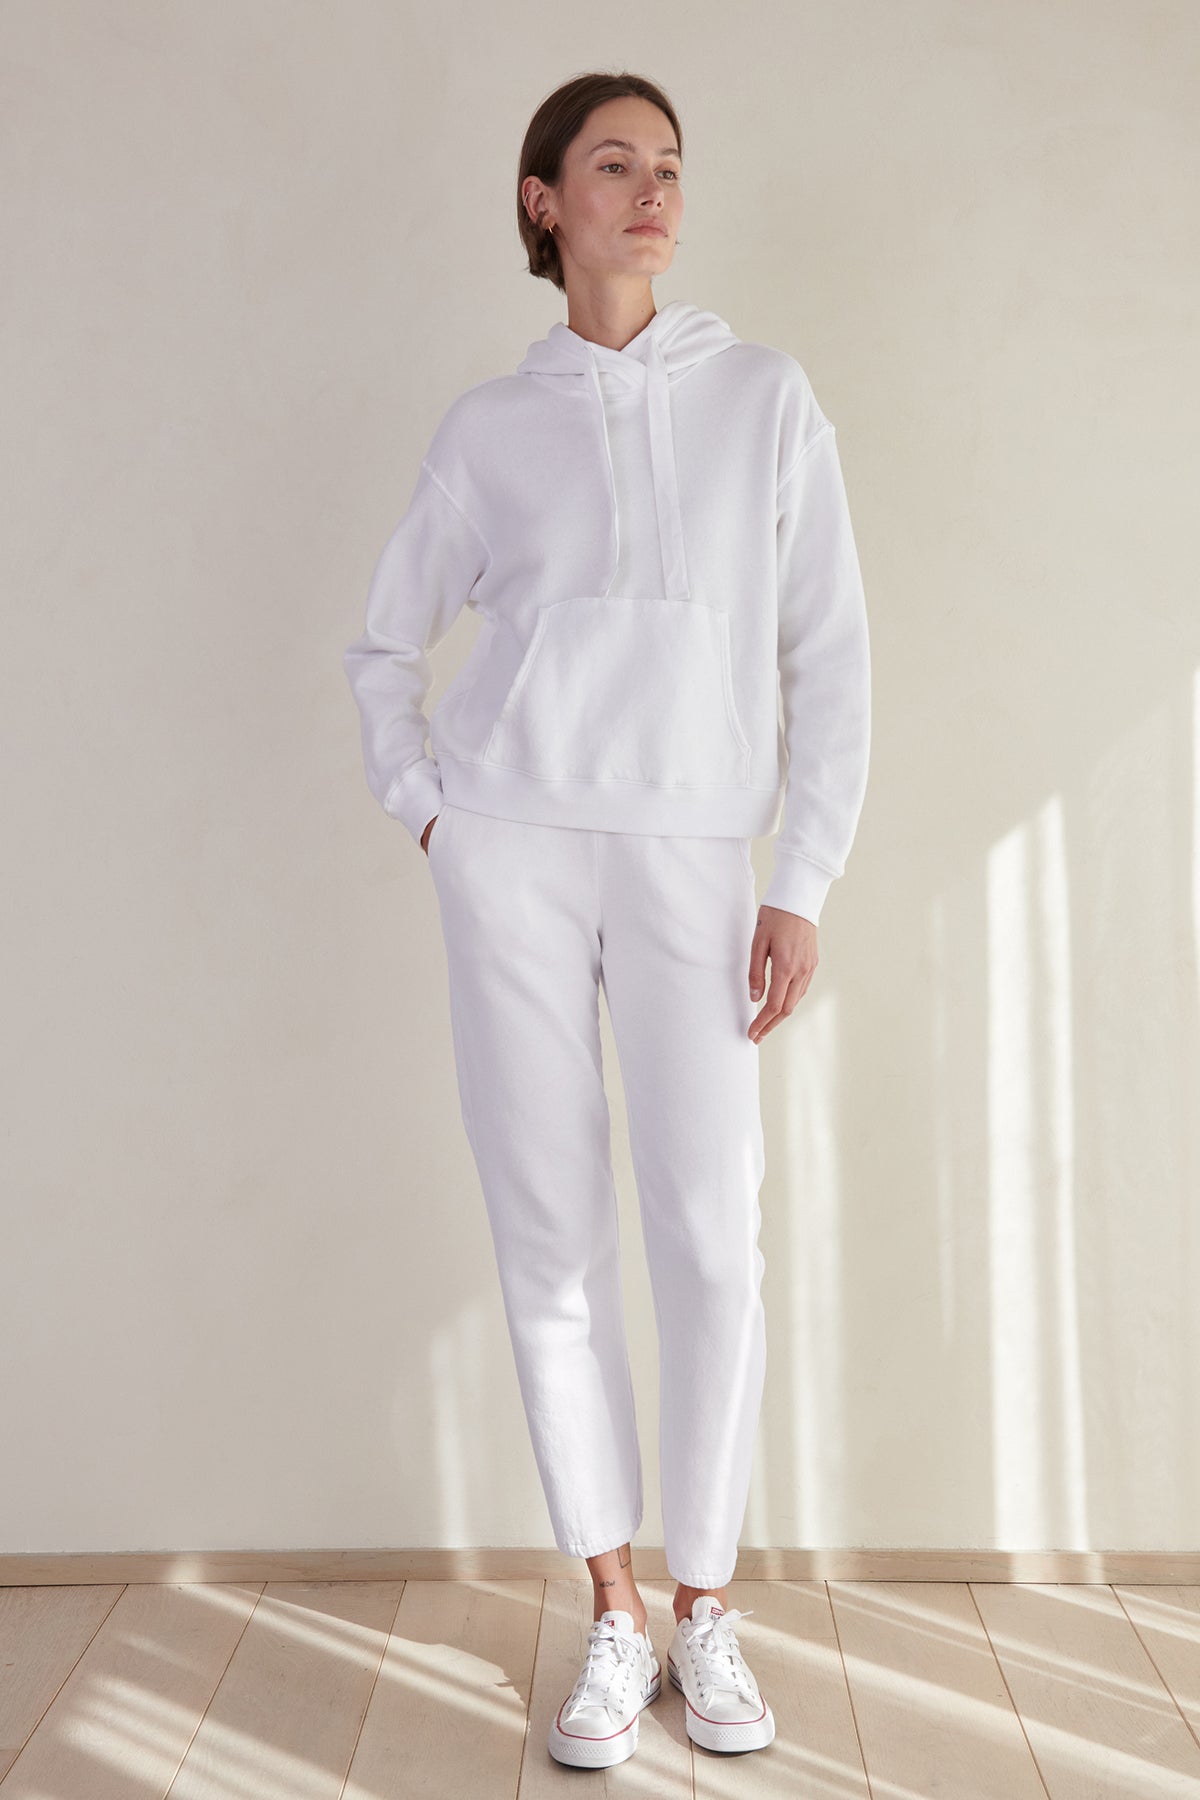   a woman wearing ZUMA SWEATPANTS by Velvet by Jenny Graham and a white hoodie. 